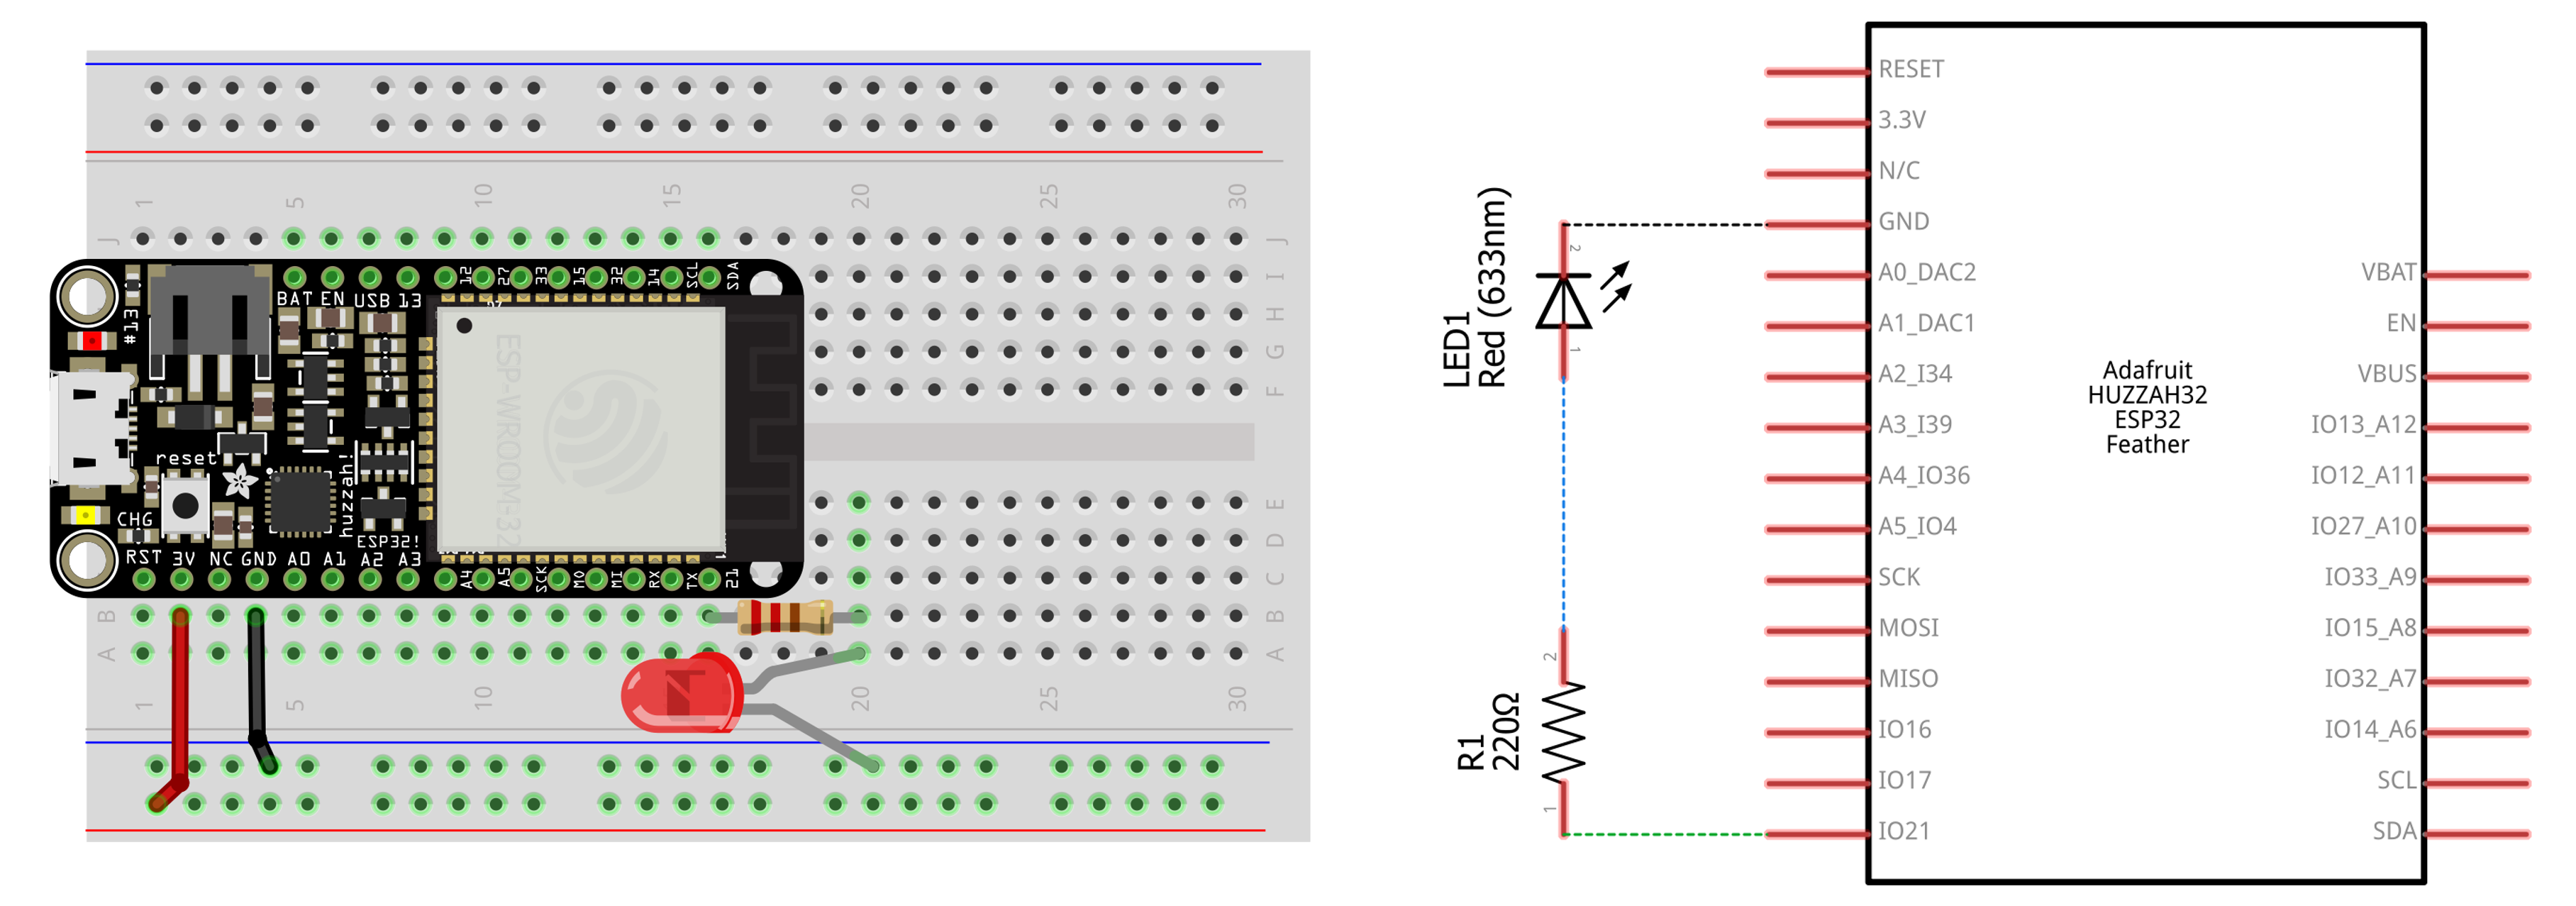 Circuit showing LED connected to GPIO #21 via a current limiting resistor